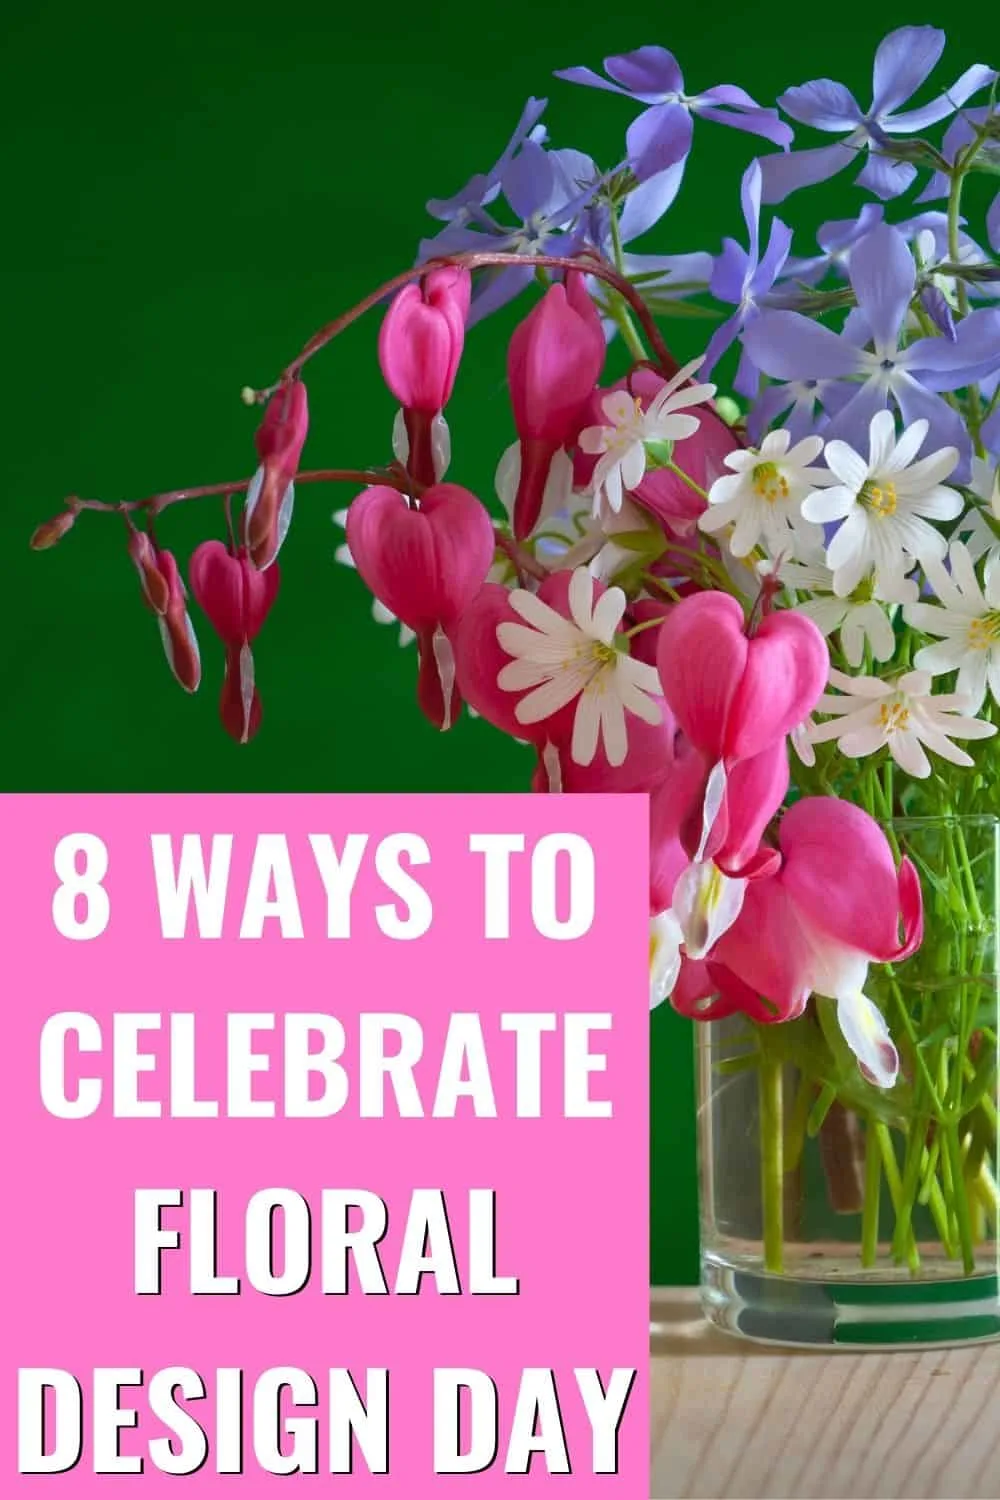 8 ways to celebrate floral design day